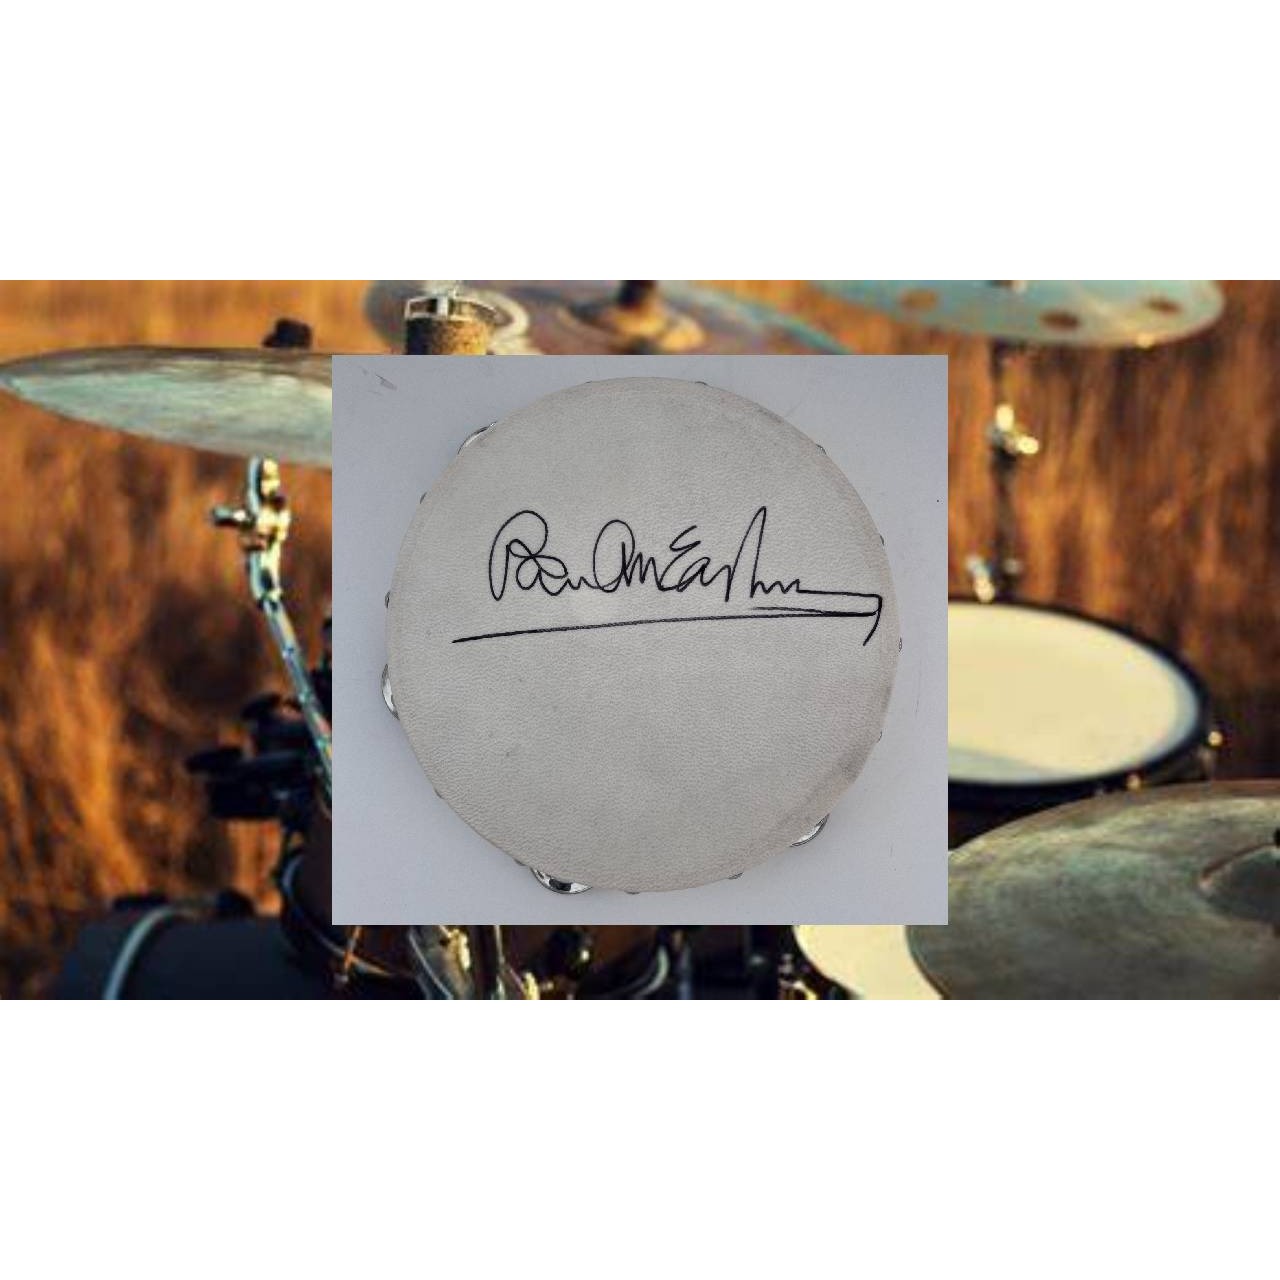 Paul McCartney 10 inch tambourine signed with proof